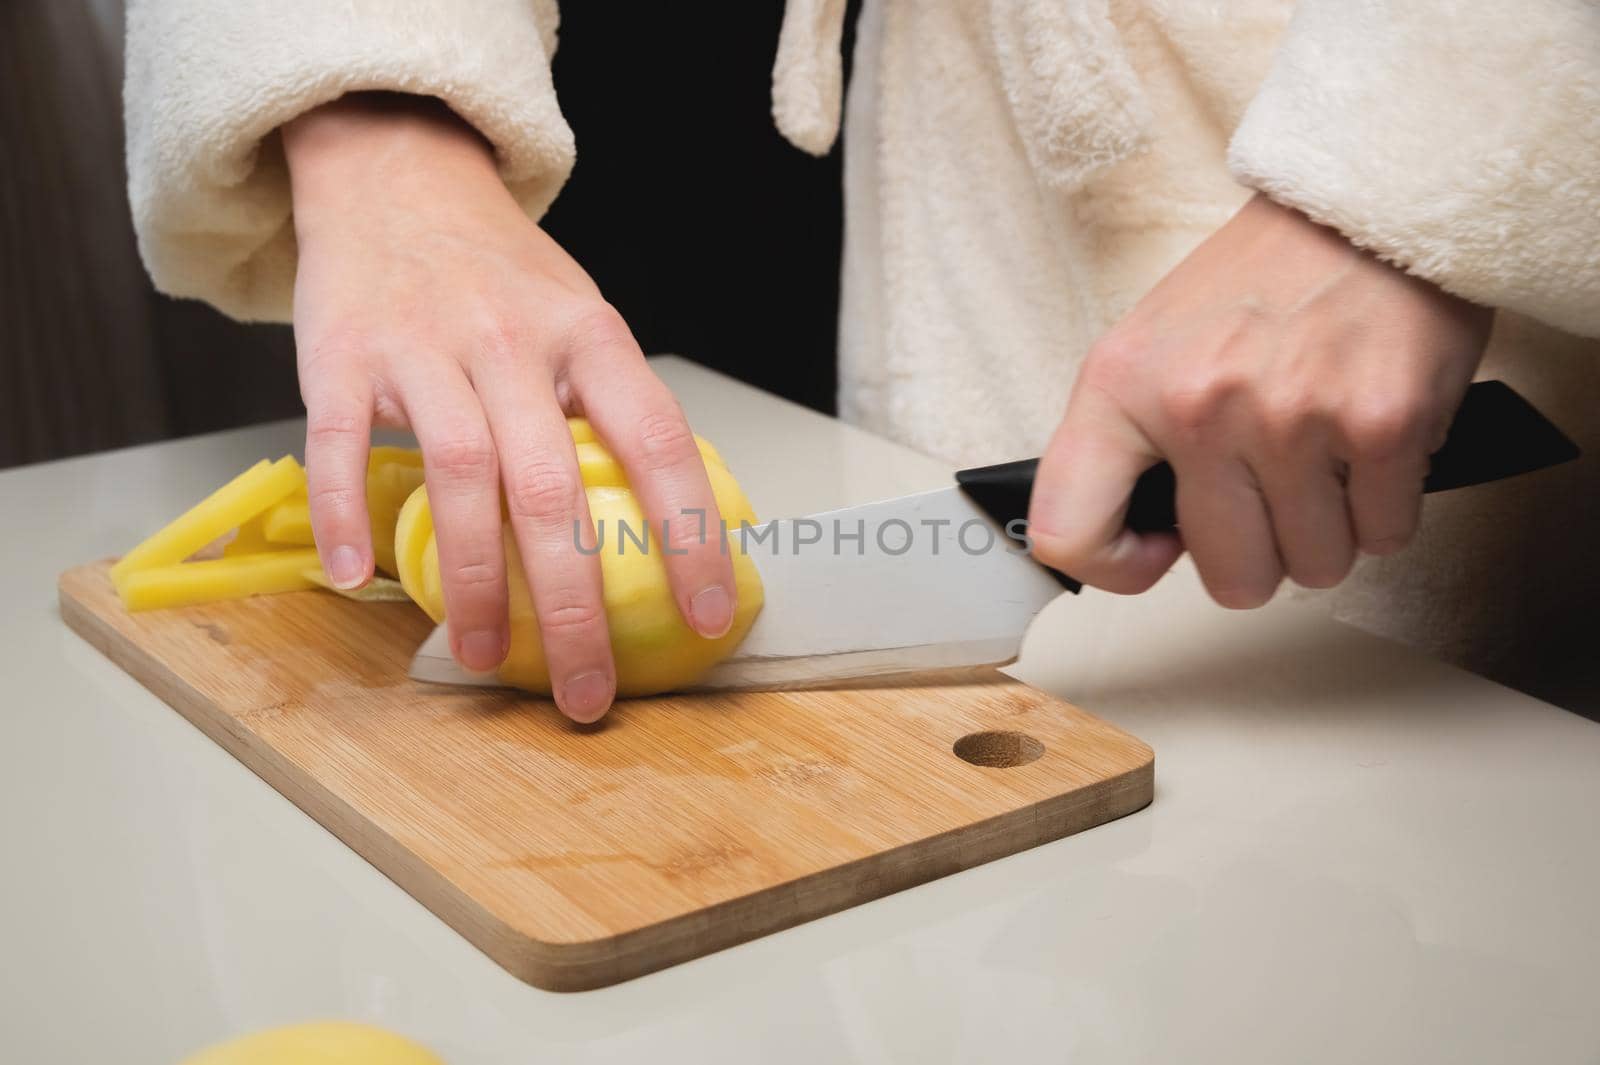 Close-up of female hands cutting peeled potatoes on a wooden cutting board. Home cooking potatoes by yanik88